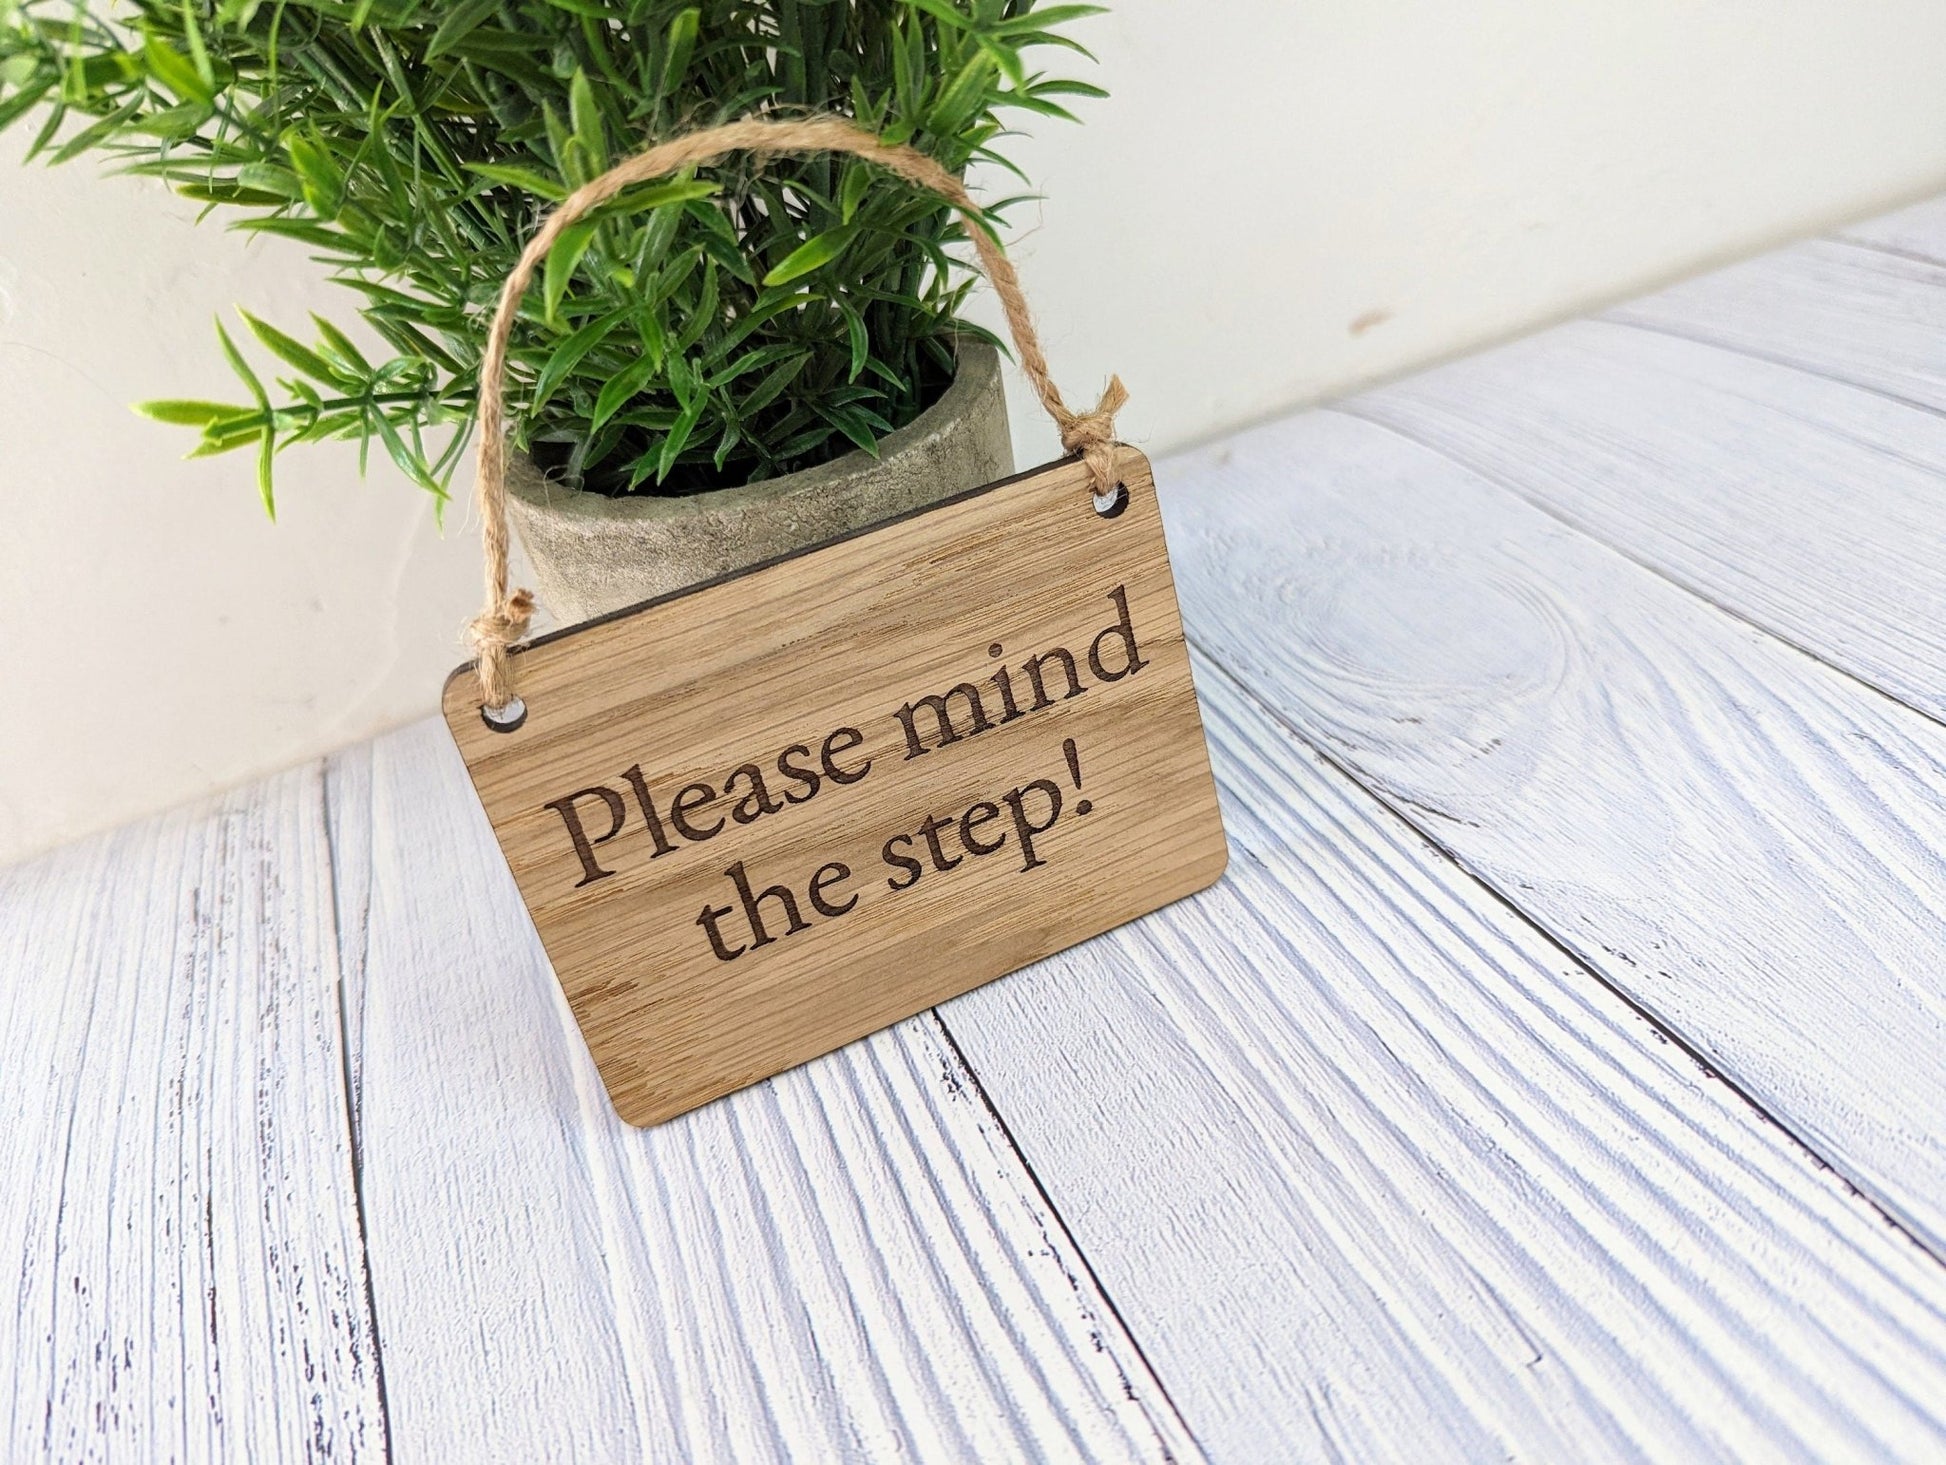 Please Mind the Step Sign - Customisable Wooden Warning Sign - Ideal for Home, Office, or Business - Eco-Friendly Materials - CherryGroveCraft